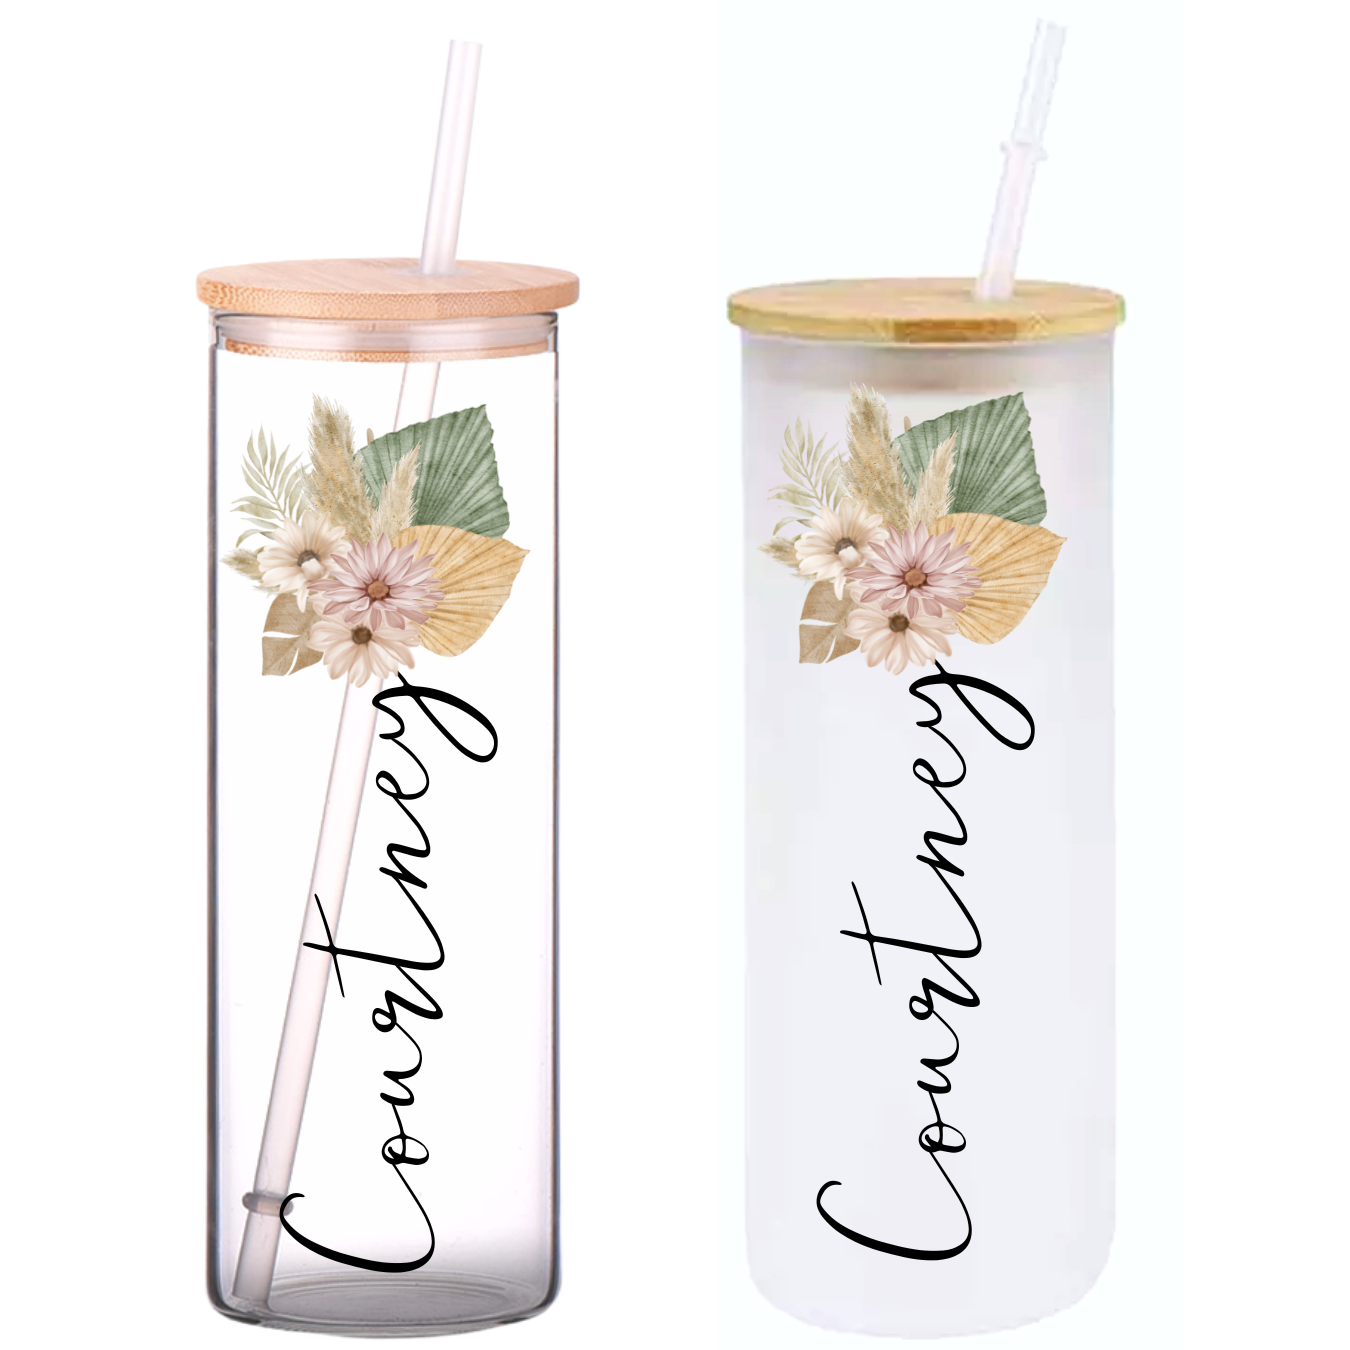 POSH SOIREE Floral Nana Tumbler, 20oz. with Straw and Lid